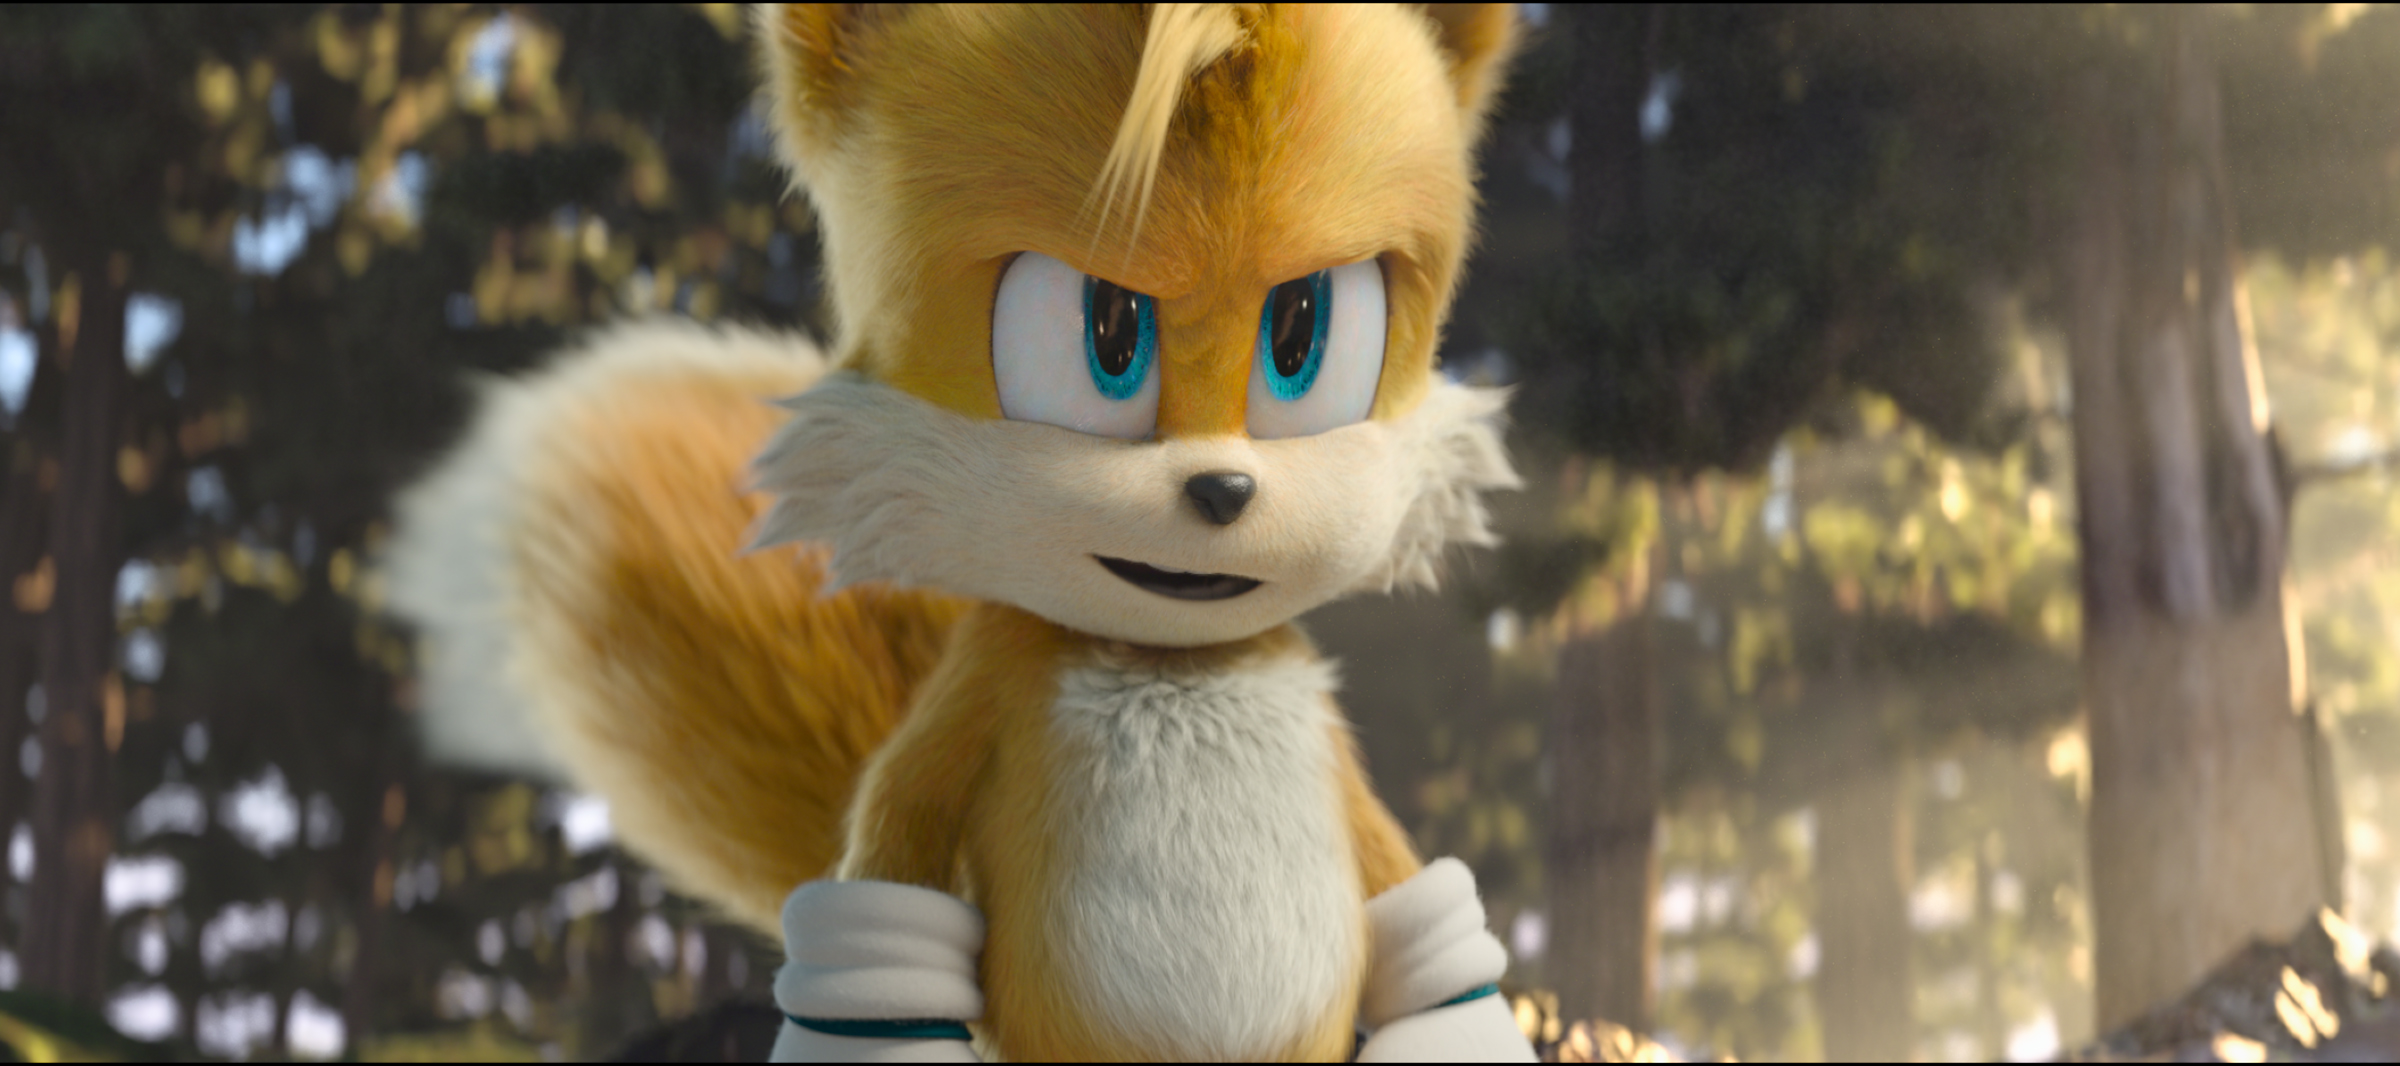 Is Tails a guy or a girl?